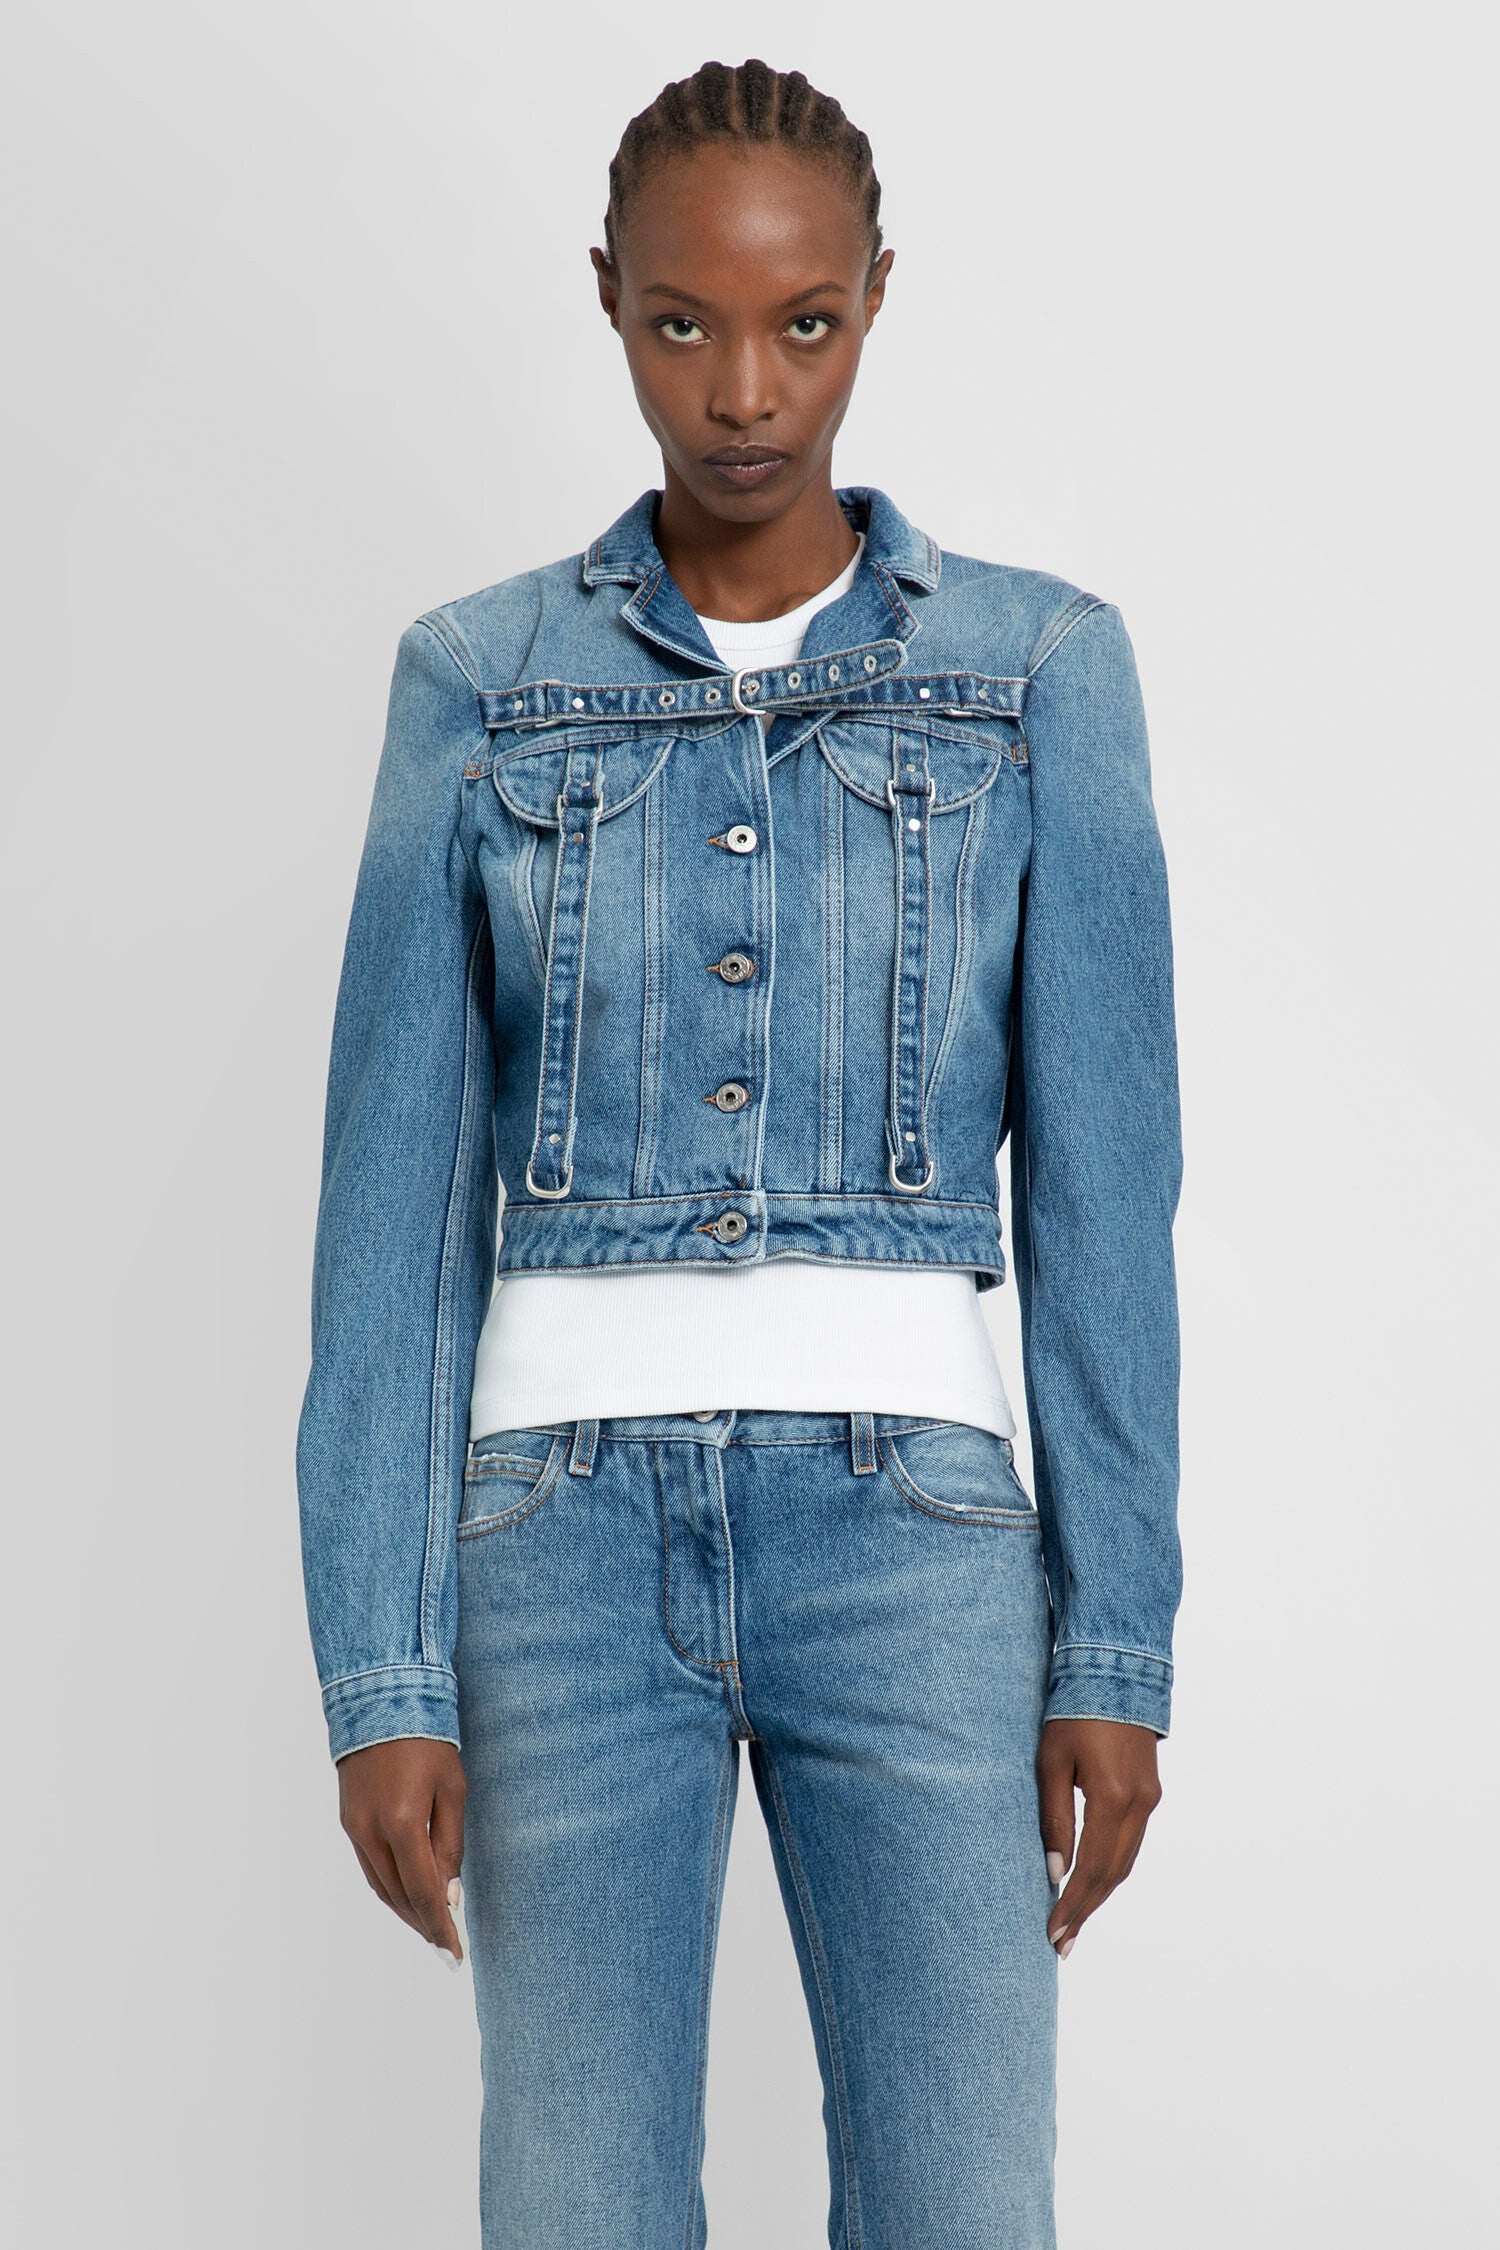 OFF-WHITE WOMAN BLUE JACKETS - 2